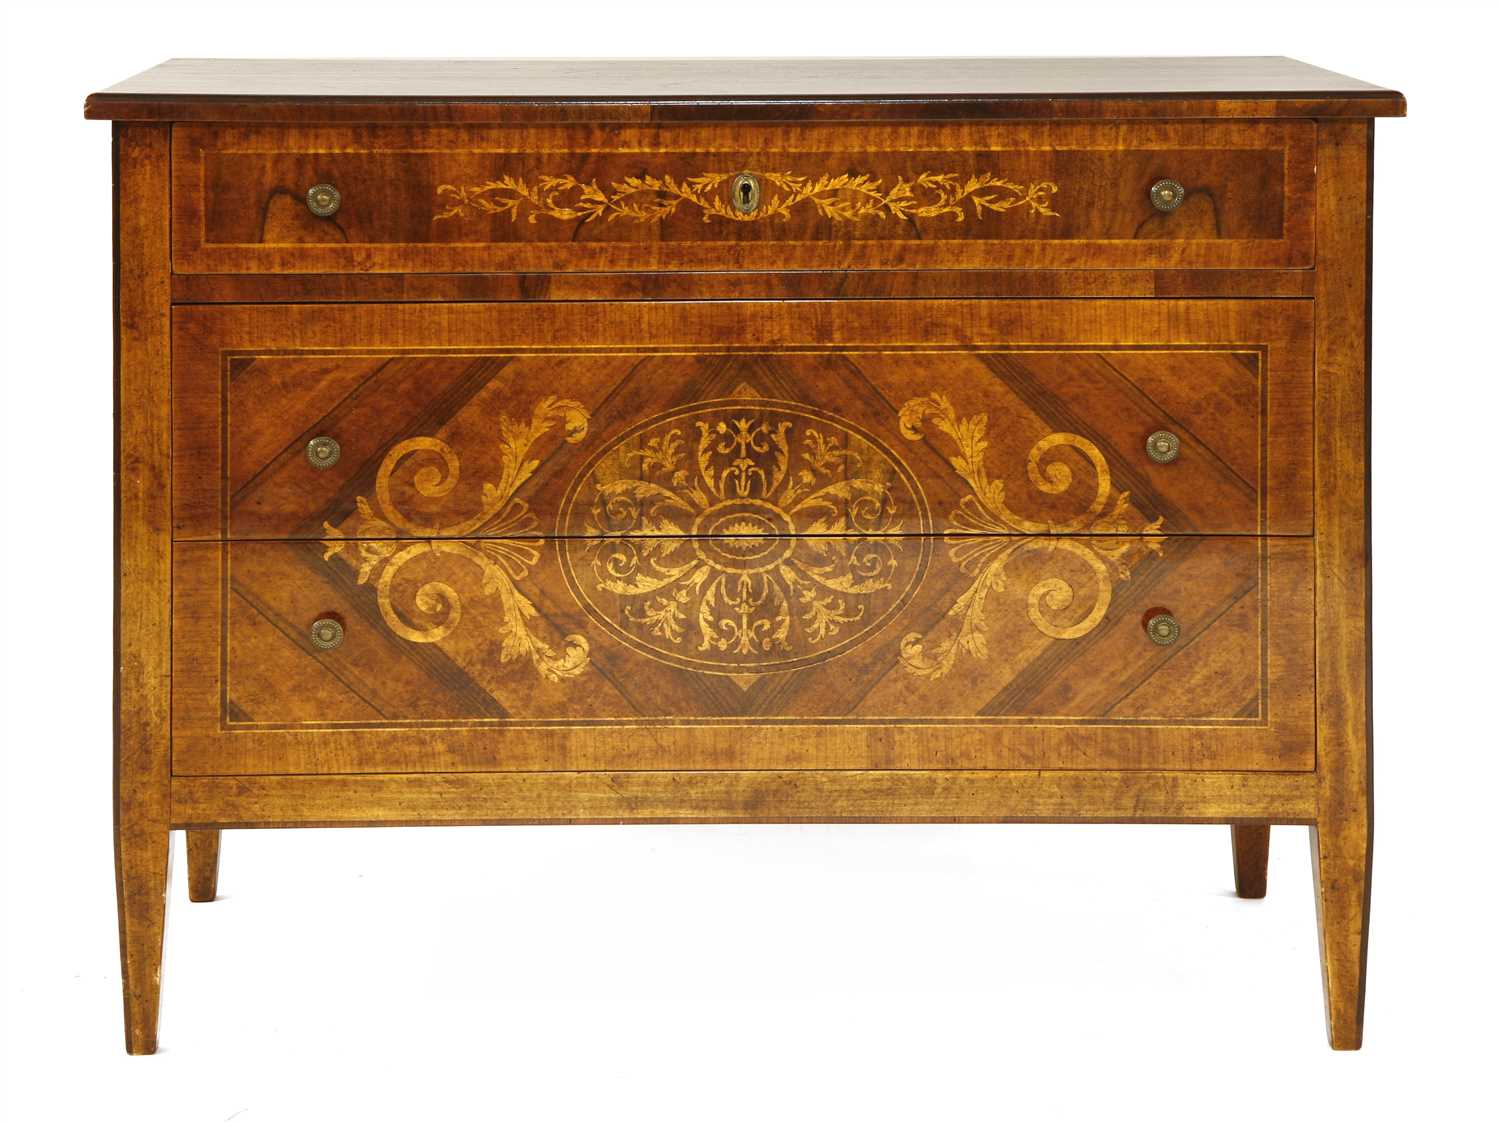 Lot 377 - An Italian walnut and inlaid commode chest